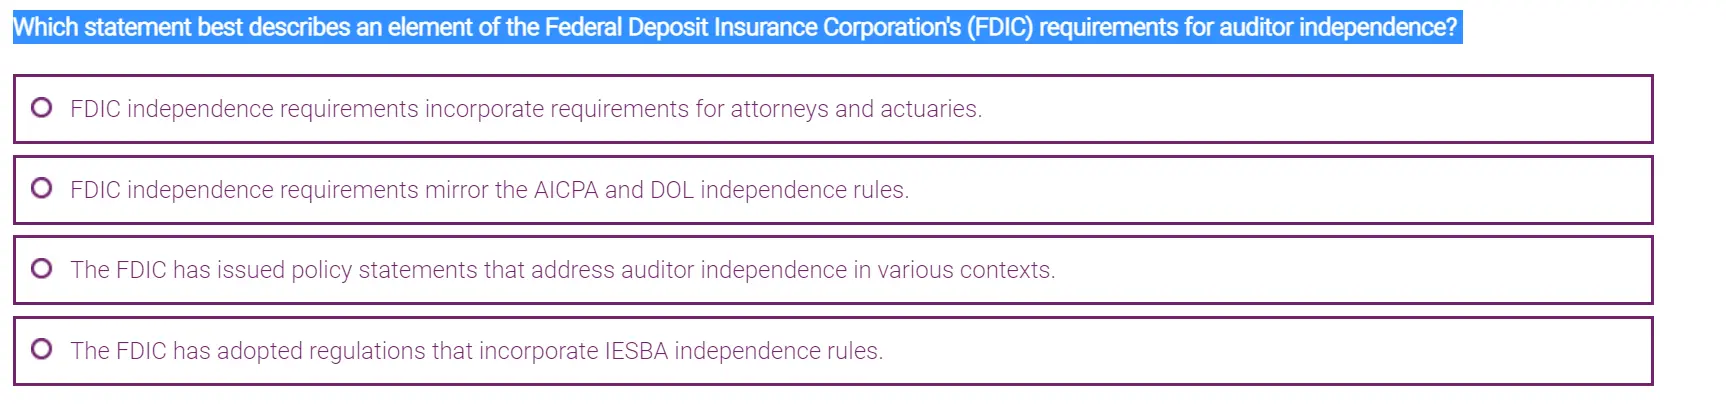 fdic auditor independence requirements - What are the requirements for auditor independence